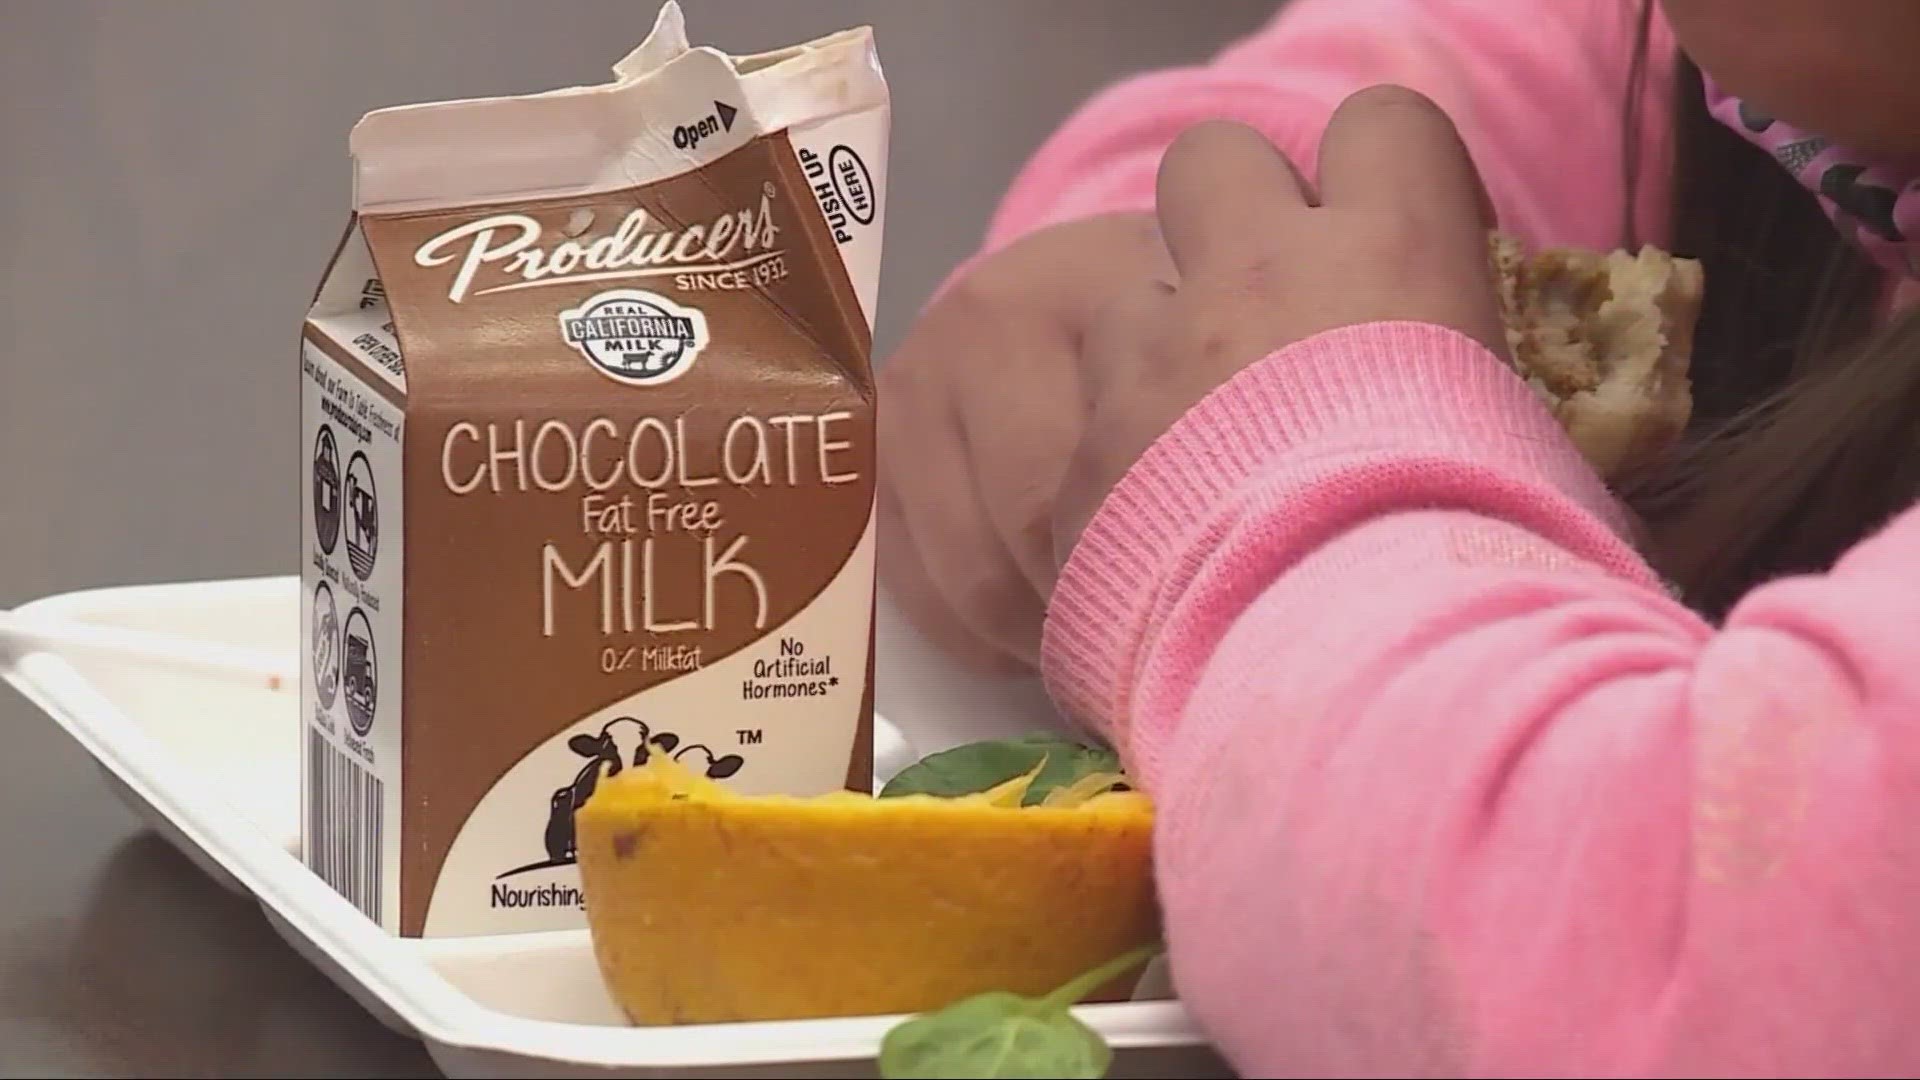 Will chocolate milk be banned in schools? The Department of Agriculture is considering removing flavored milk from elementary schools.